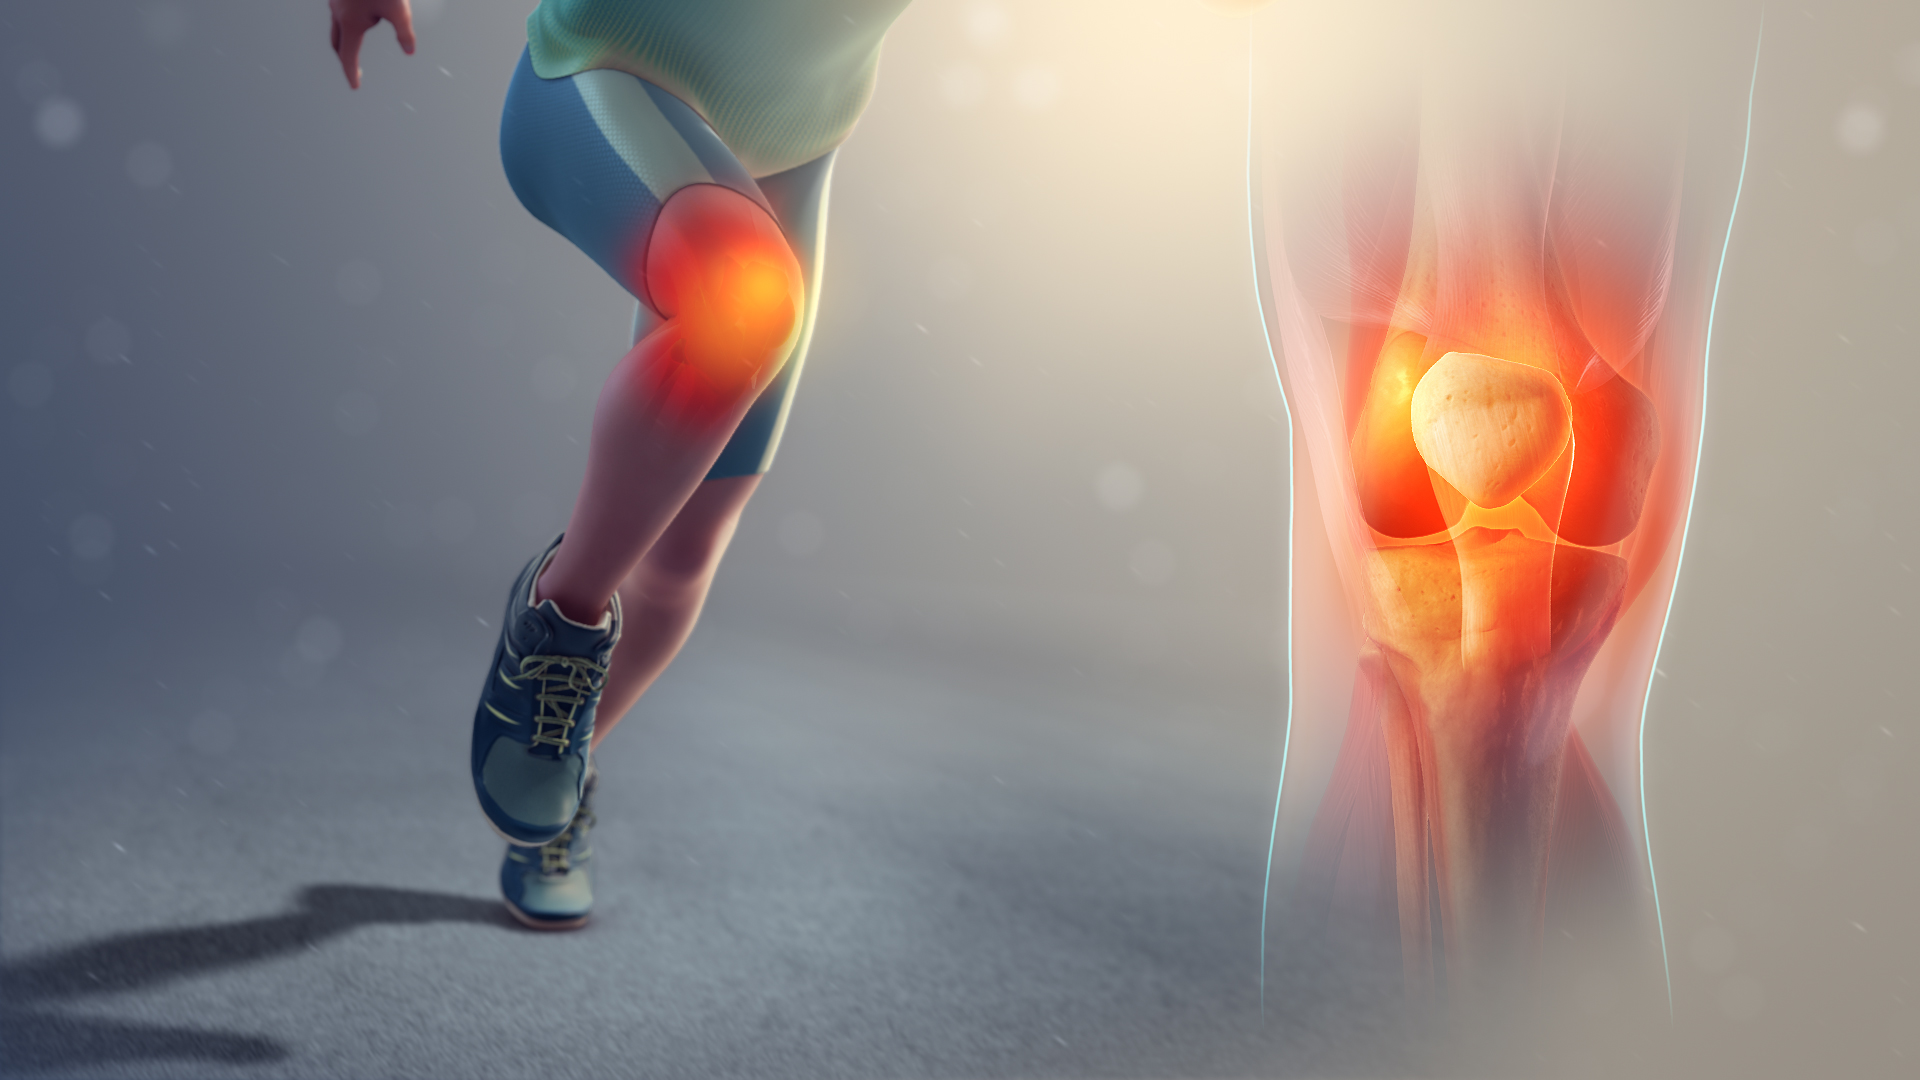 Patellofemoral Pain Syndrome Runners Knee Scientific Animations